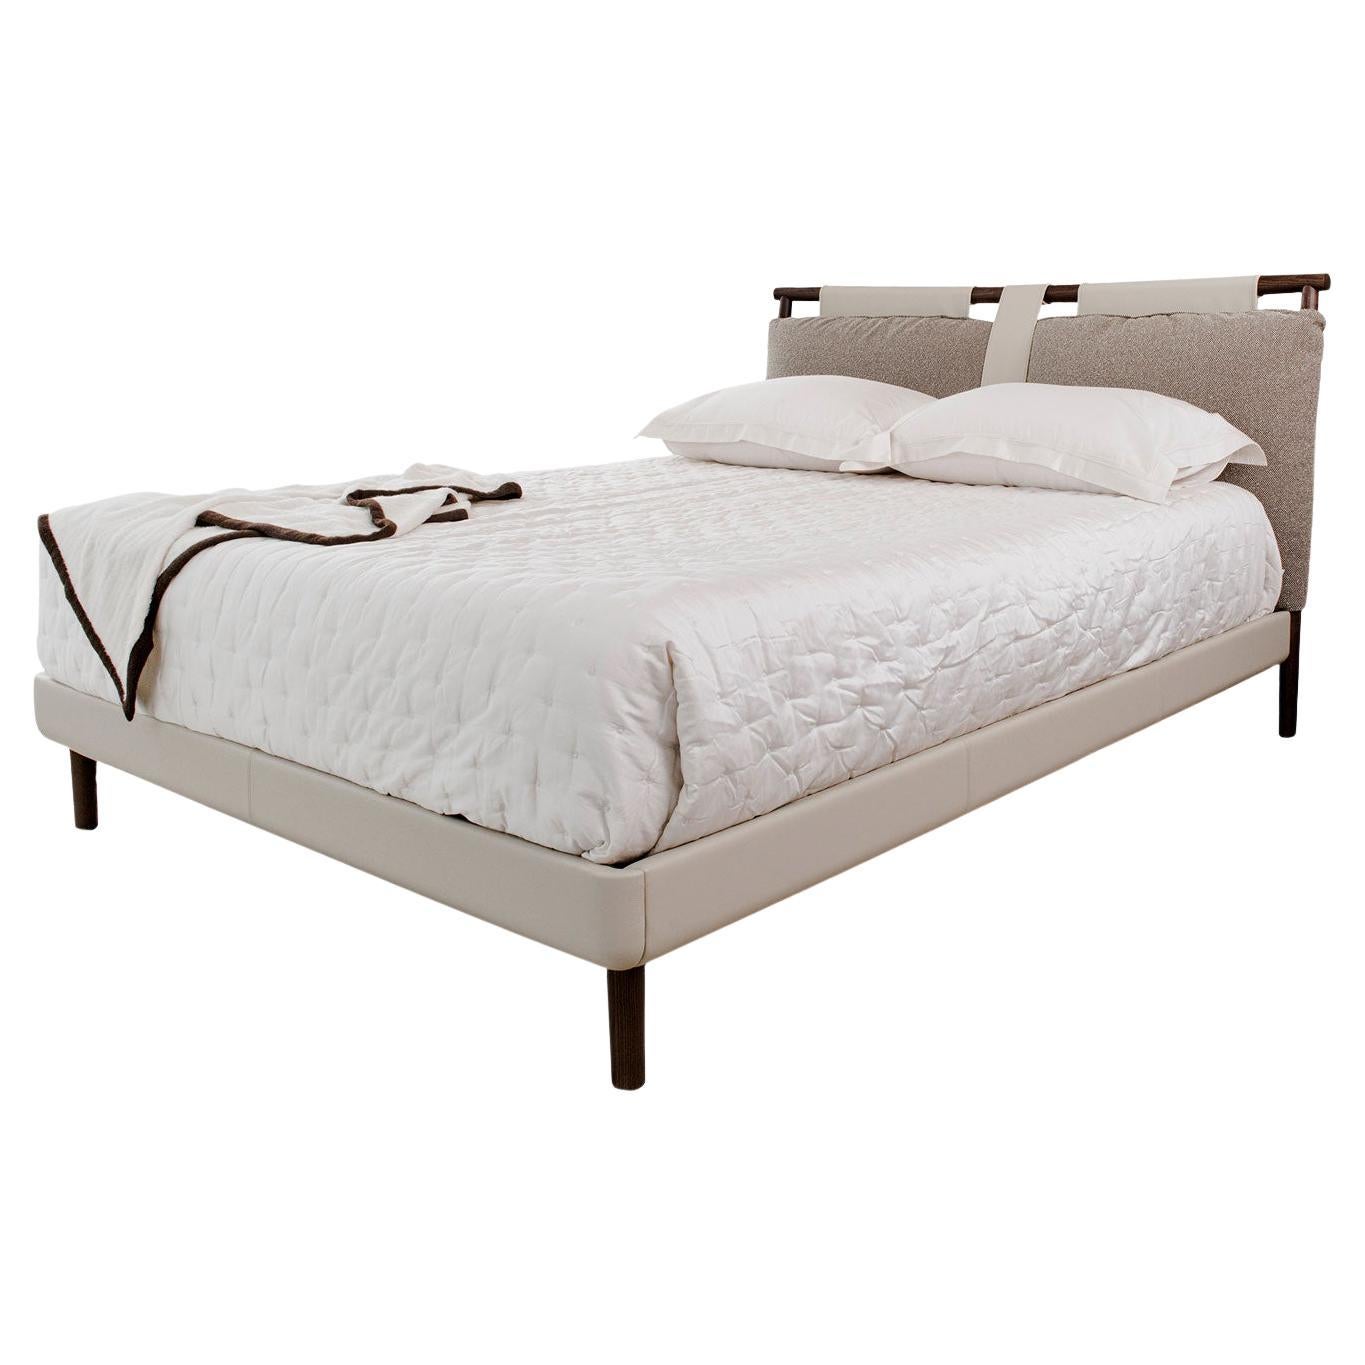 Leather, Wood + Fabric Queen Size Bed, Poltrona Frau